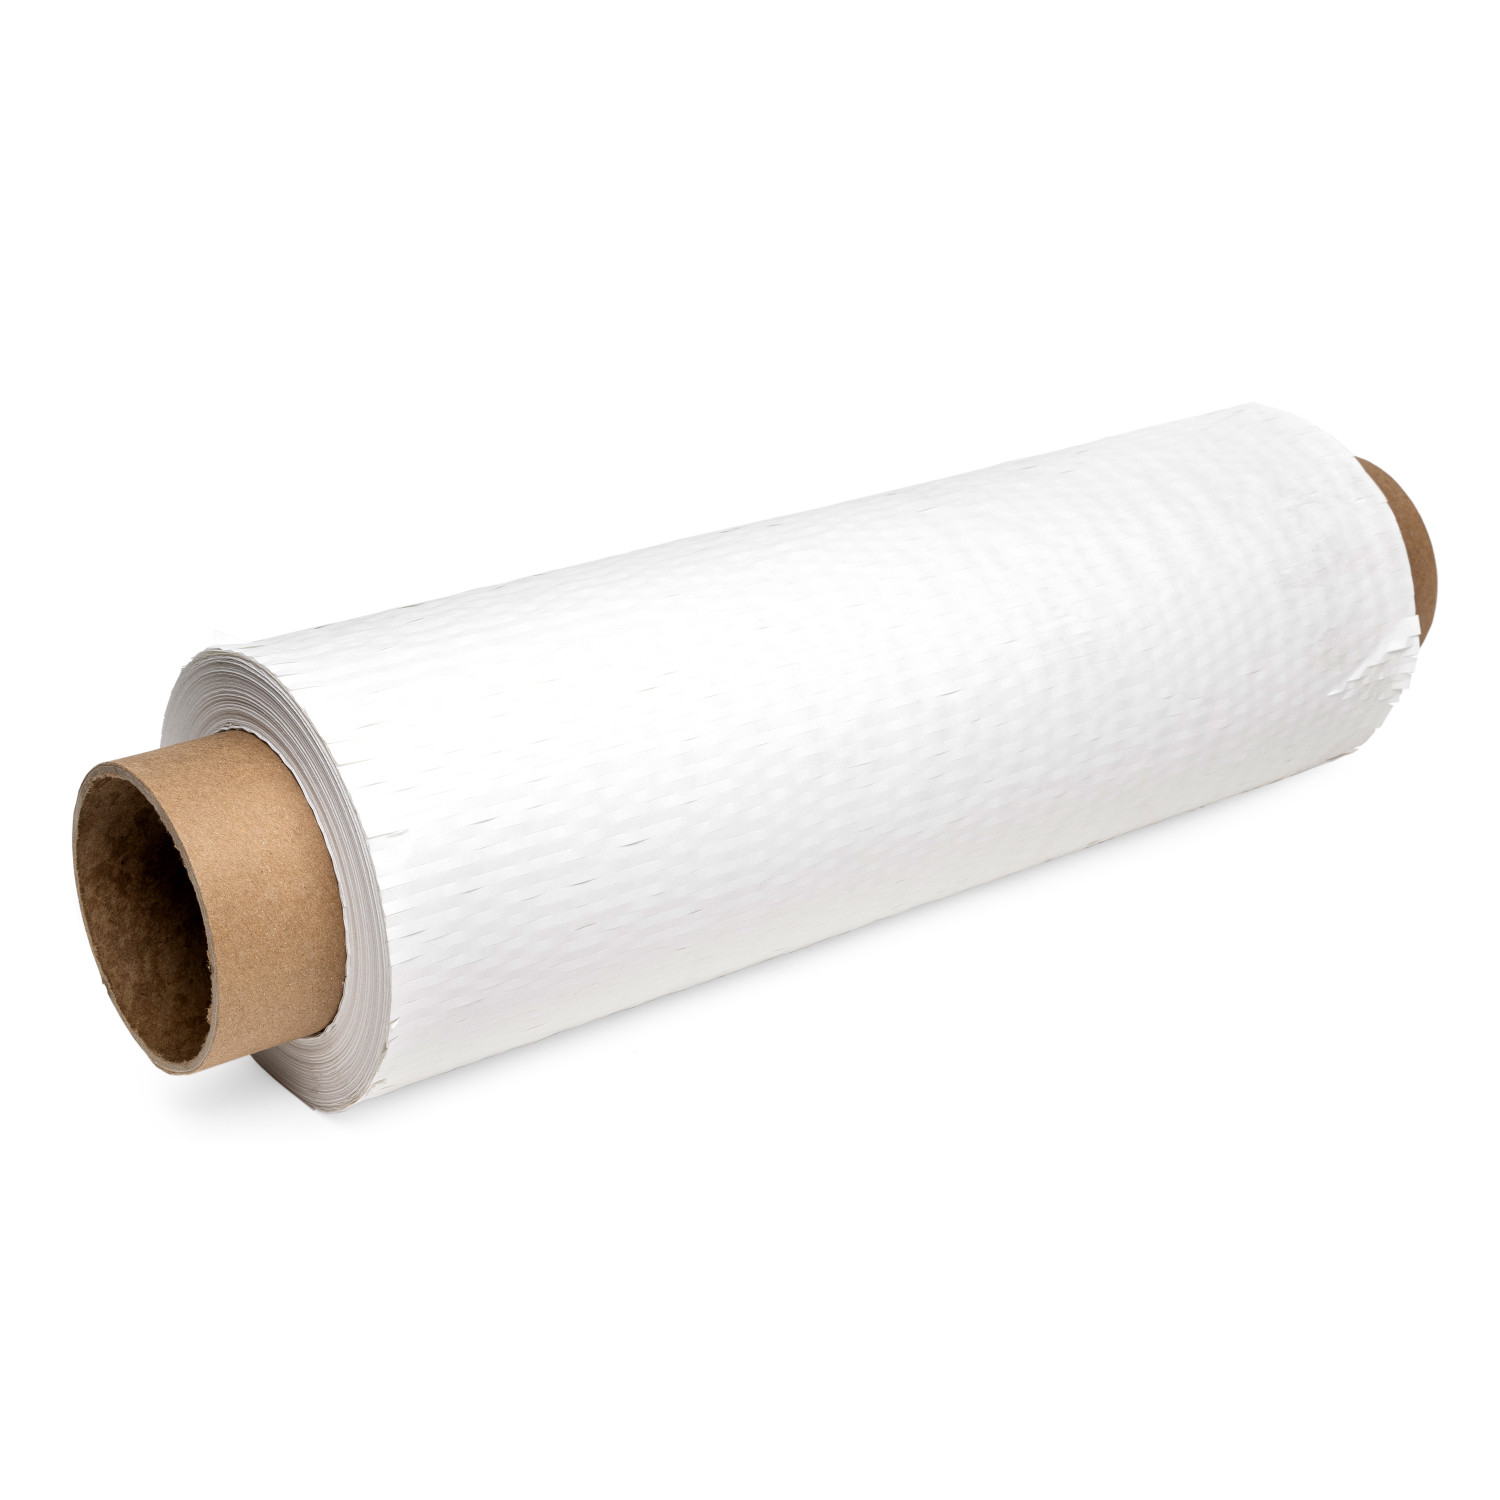 Packing Paper Sheets for Moving,250 Sheets Newsprint Packing Paper 12 x 24  Inch